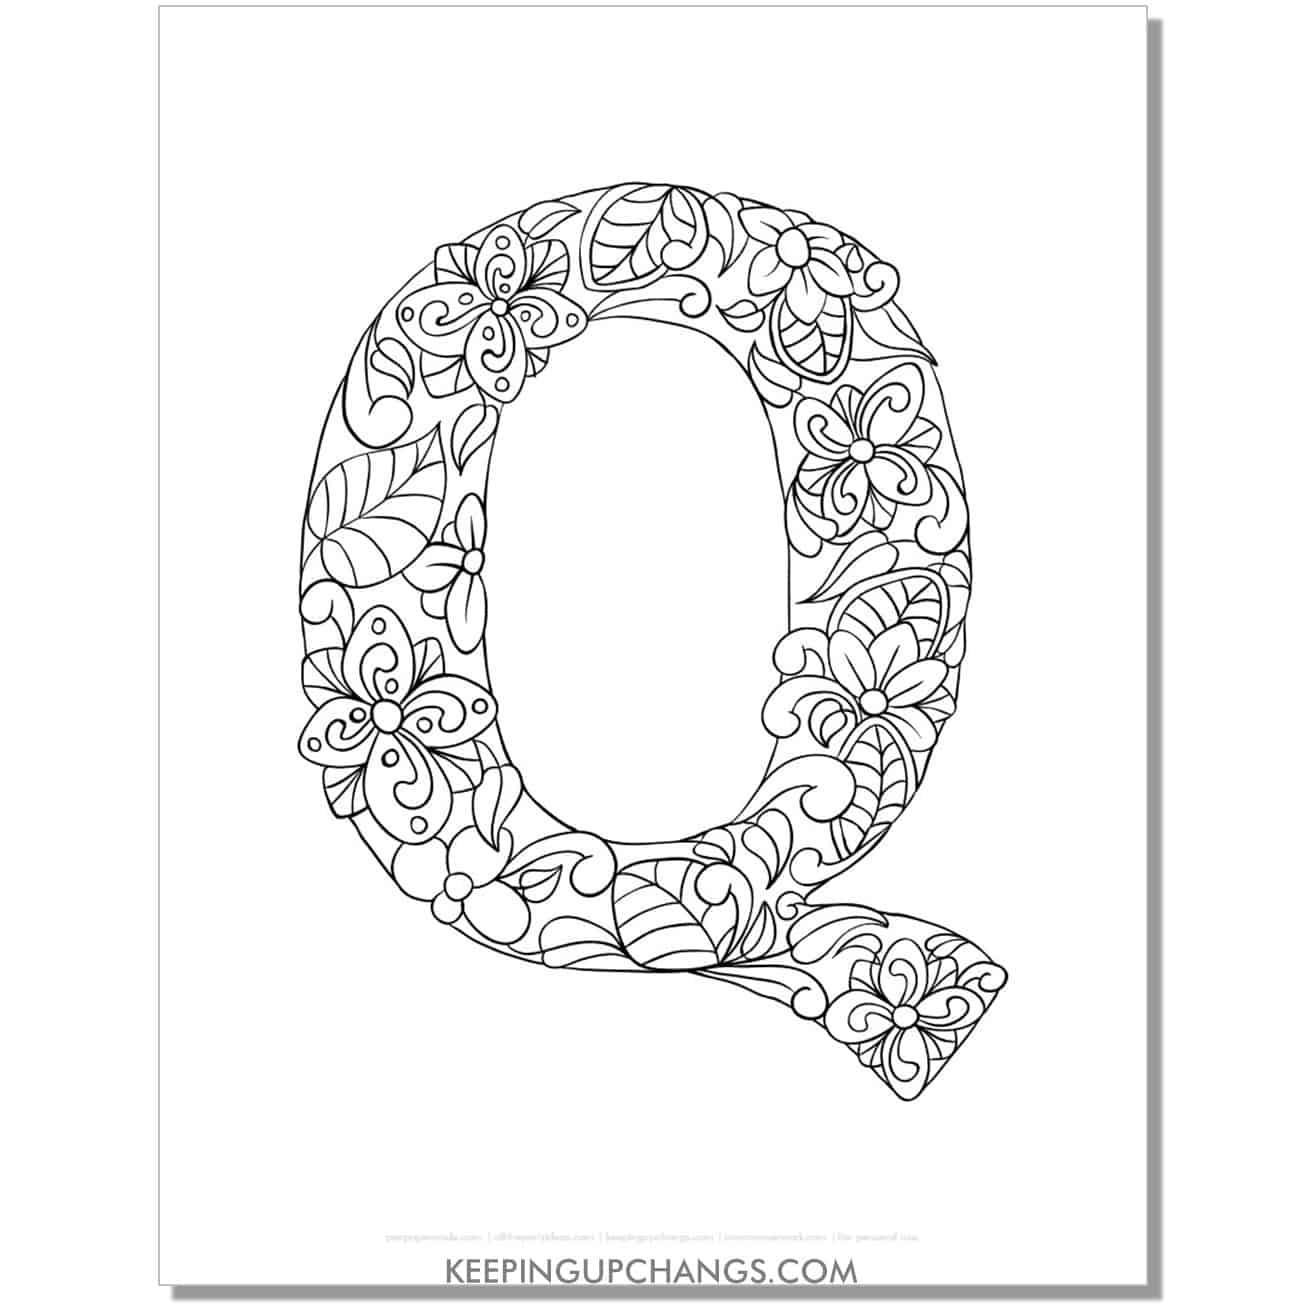 free abc q to color, complicated mandala zentangle for adults.